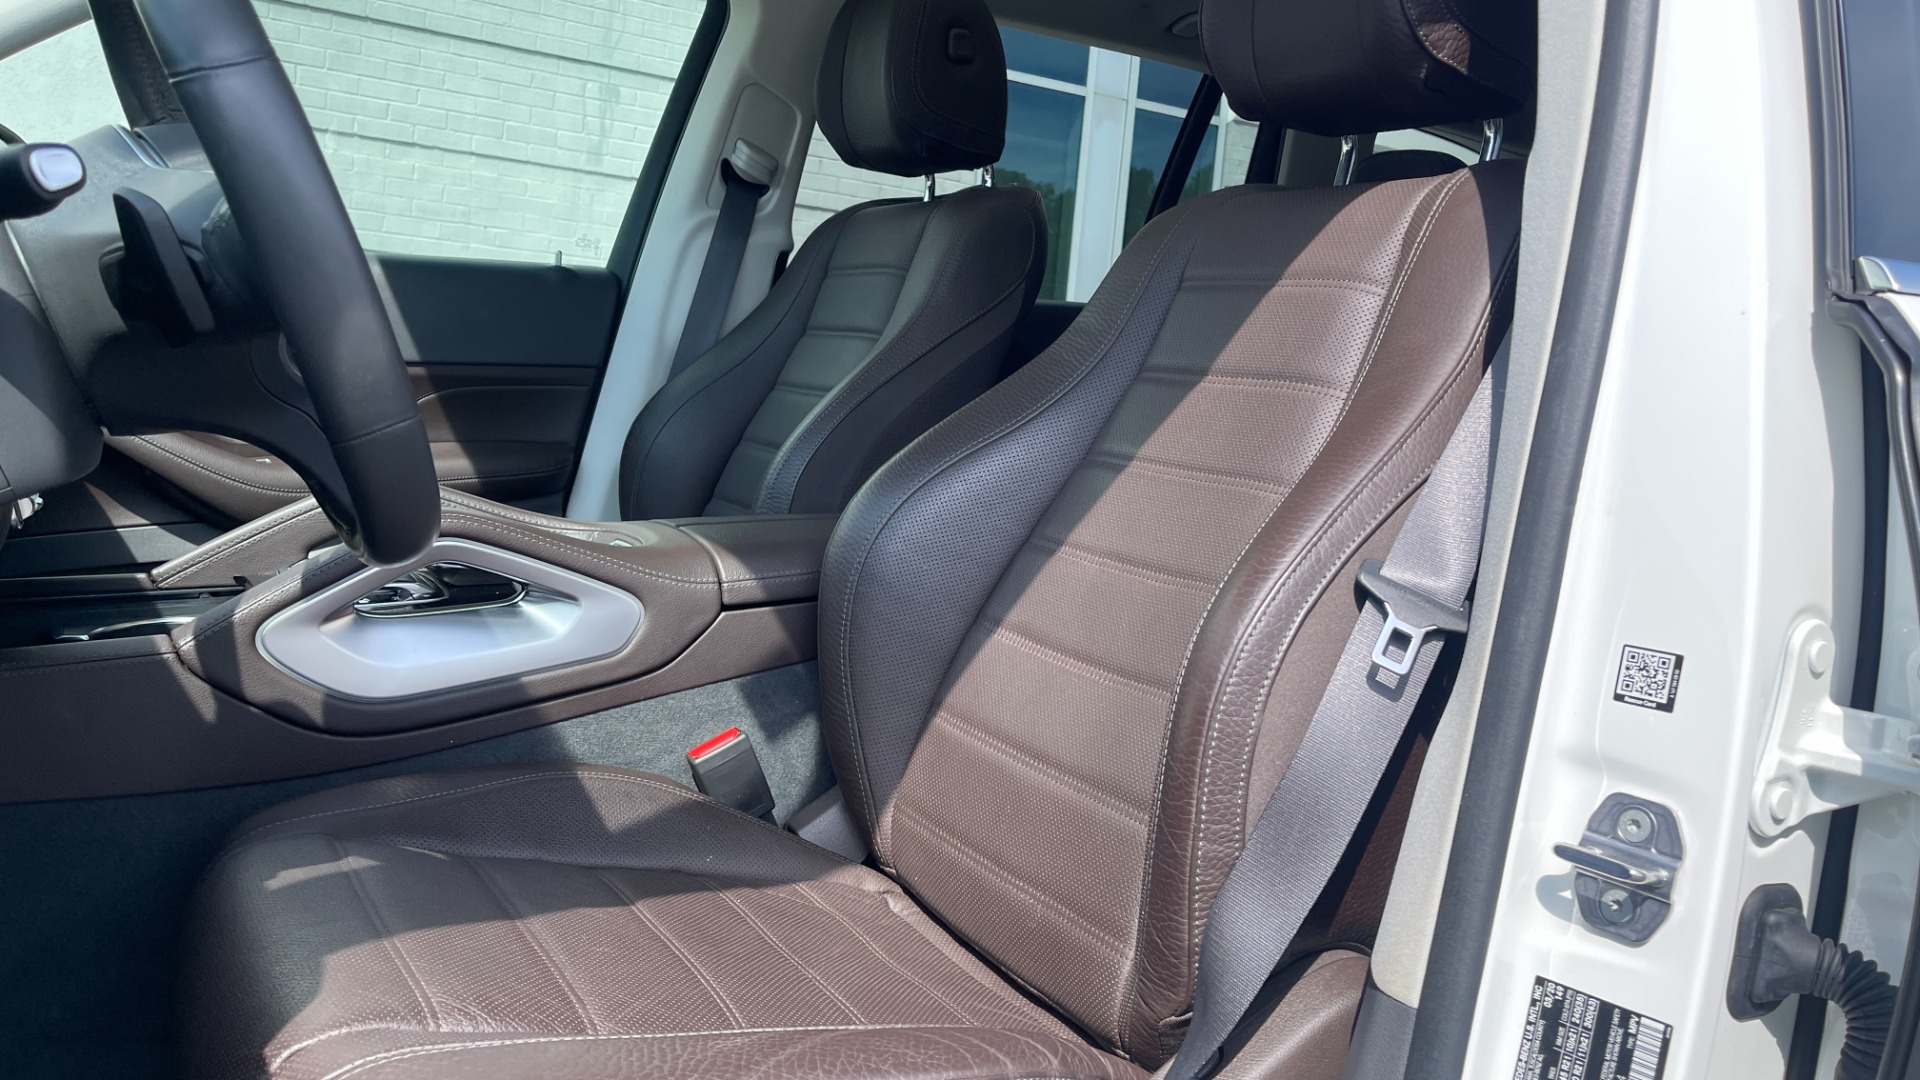 Used 2020 Mercedes-Benz GLS GLS 450 / 3 ROW / CAPTAINS CHAIRS / MASSAGE / NAV / HEADS UP DISPLAY for sale $69,999 at Formula Imports in Charlotte NC 28227 12